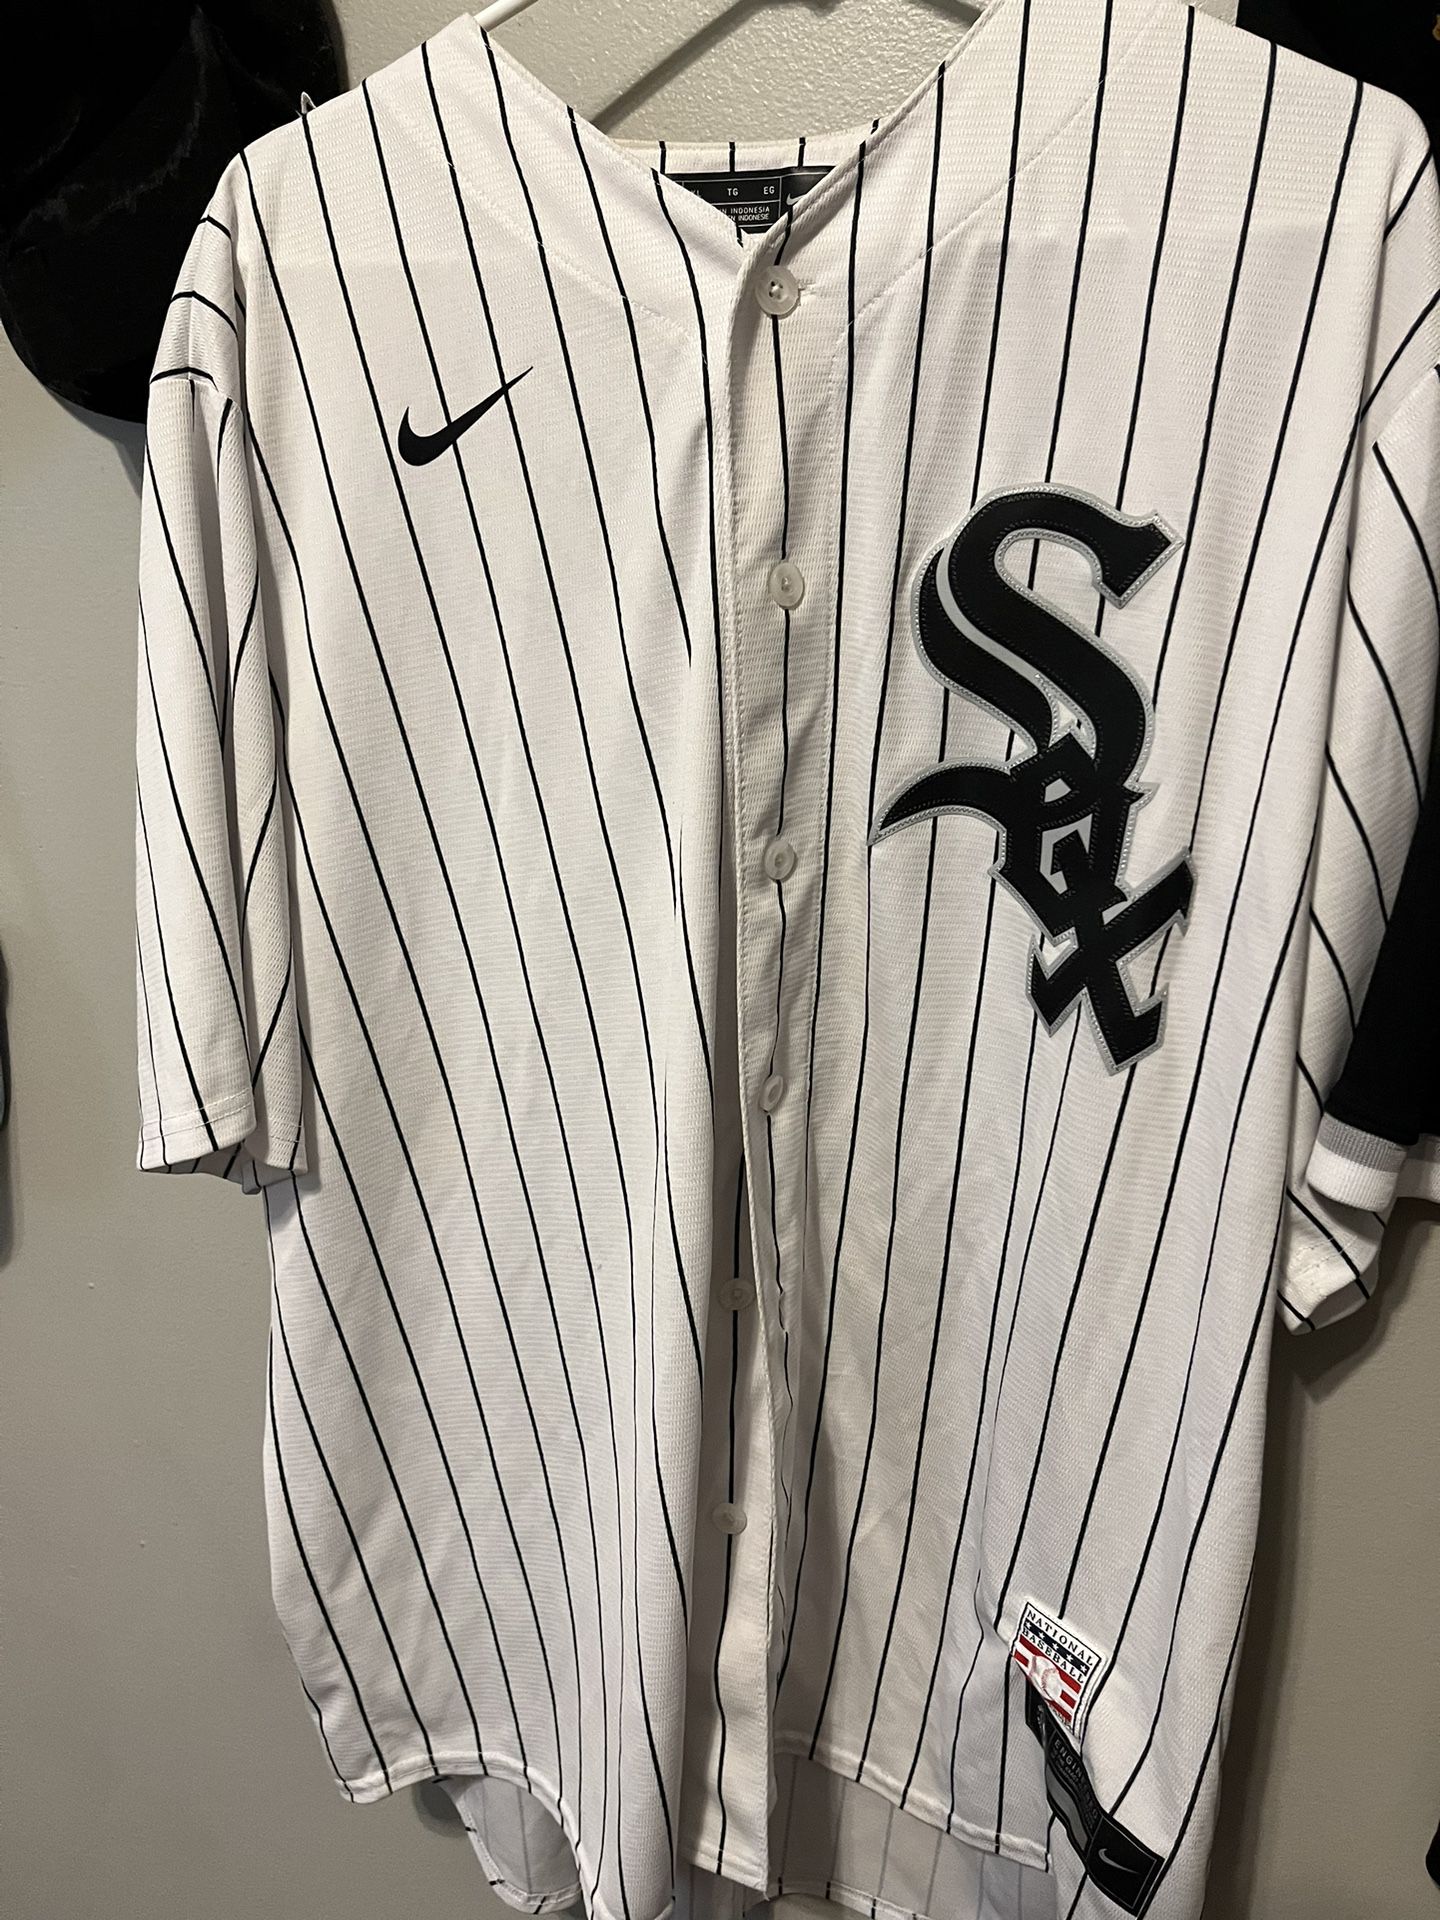 White Sox Bulls Jersey for Sale in Chicago, IL - OfferUp